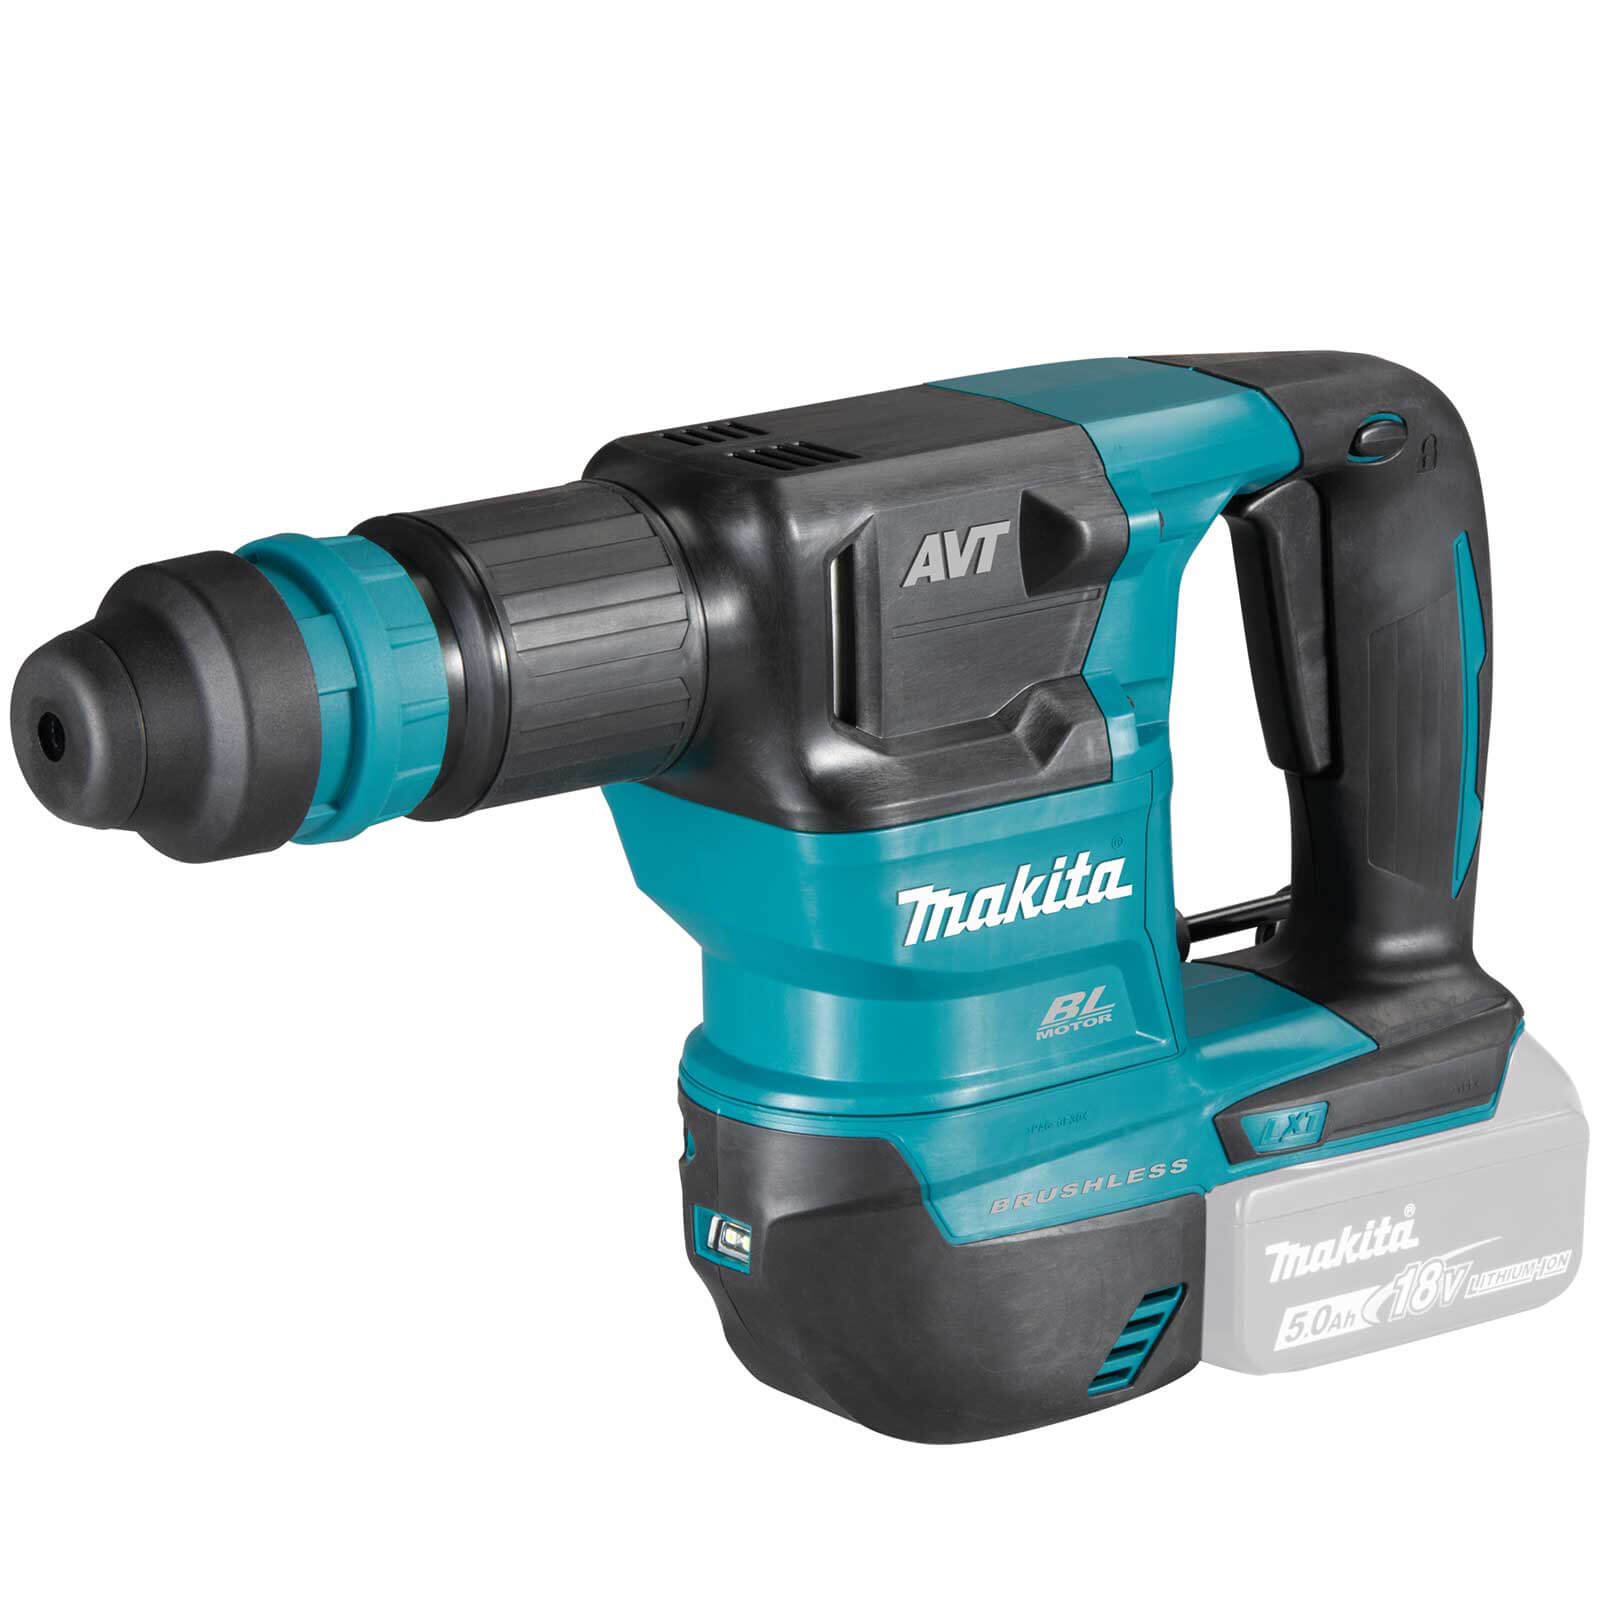 Photo of Makita Dhk180 18v Lxt Cordless Brushless Power Scraper No Batteries No Charger No Case